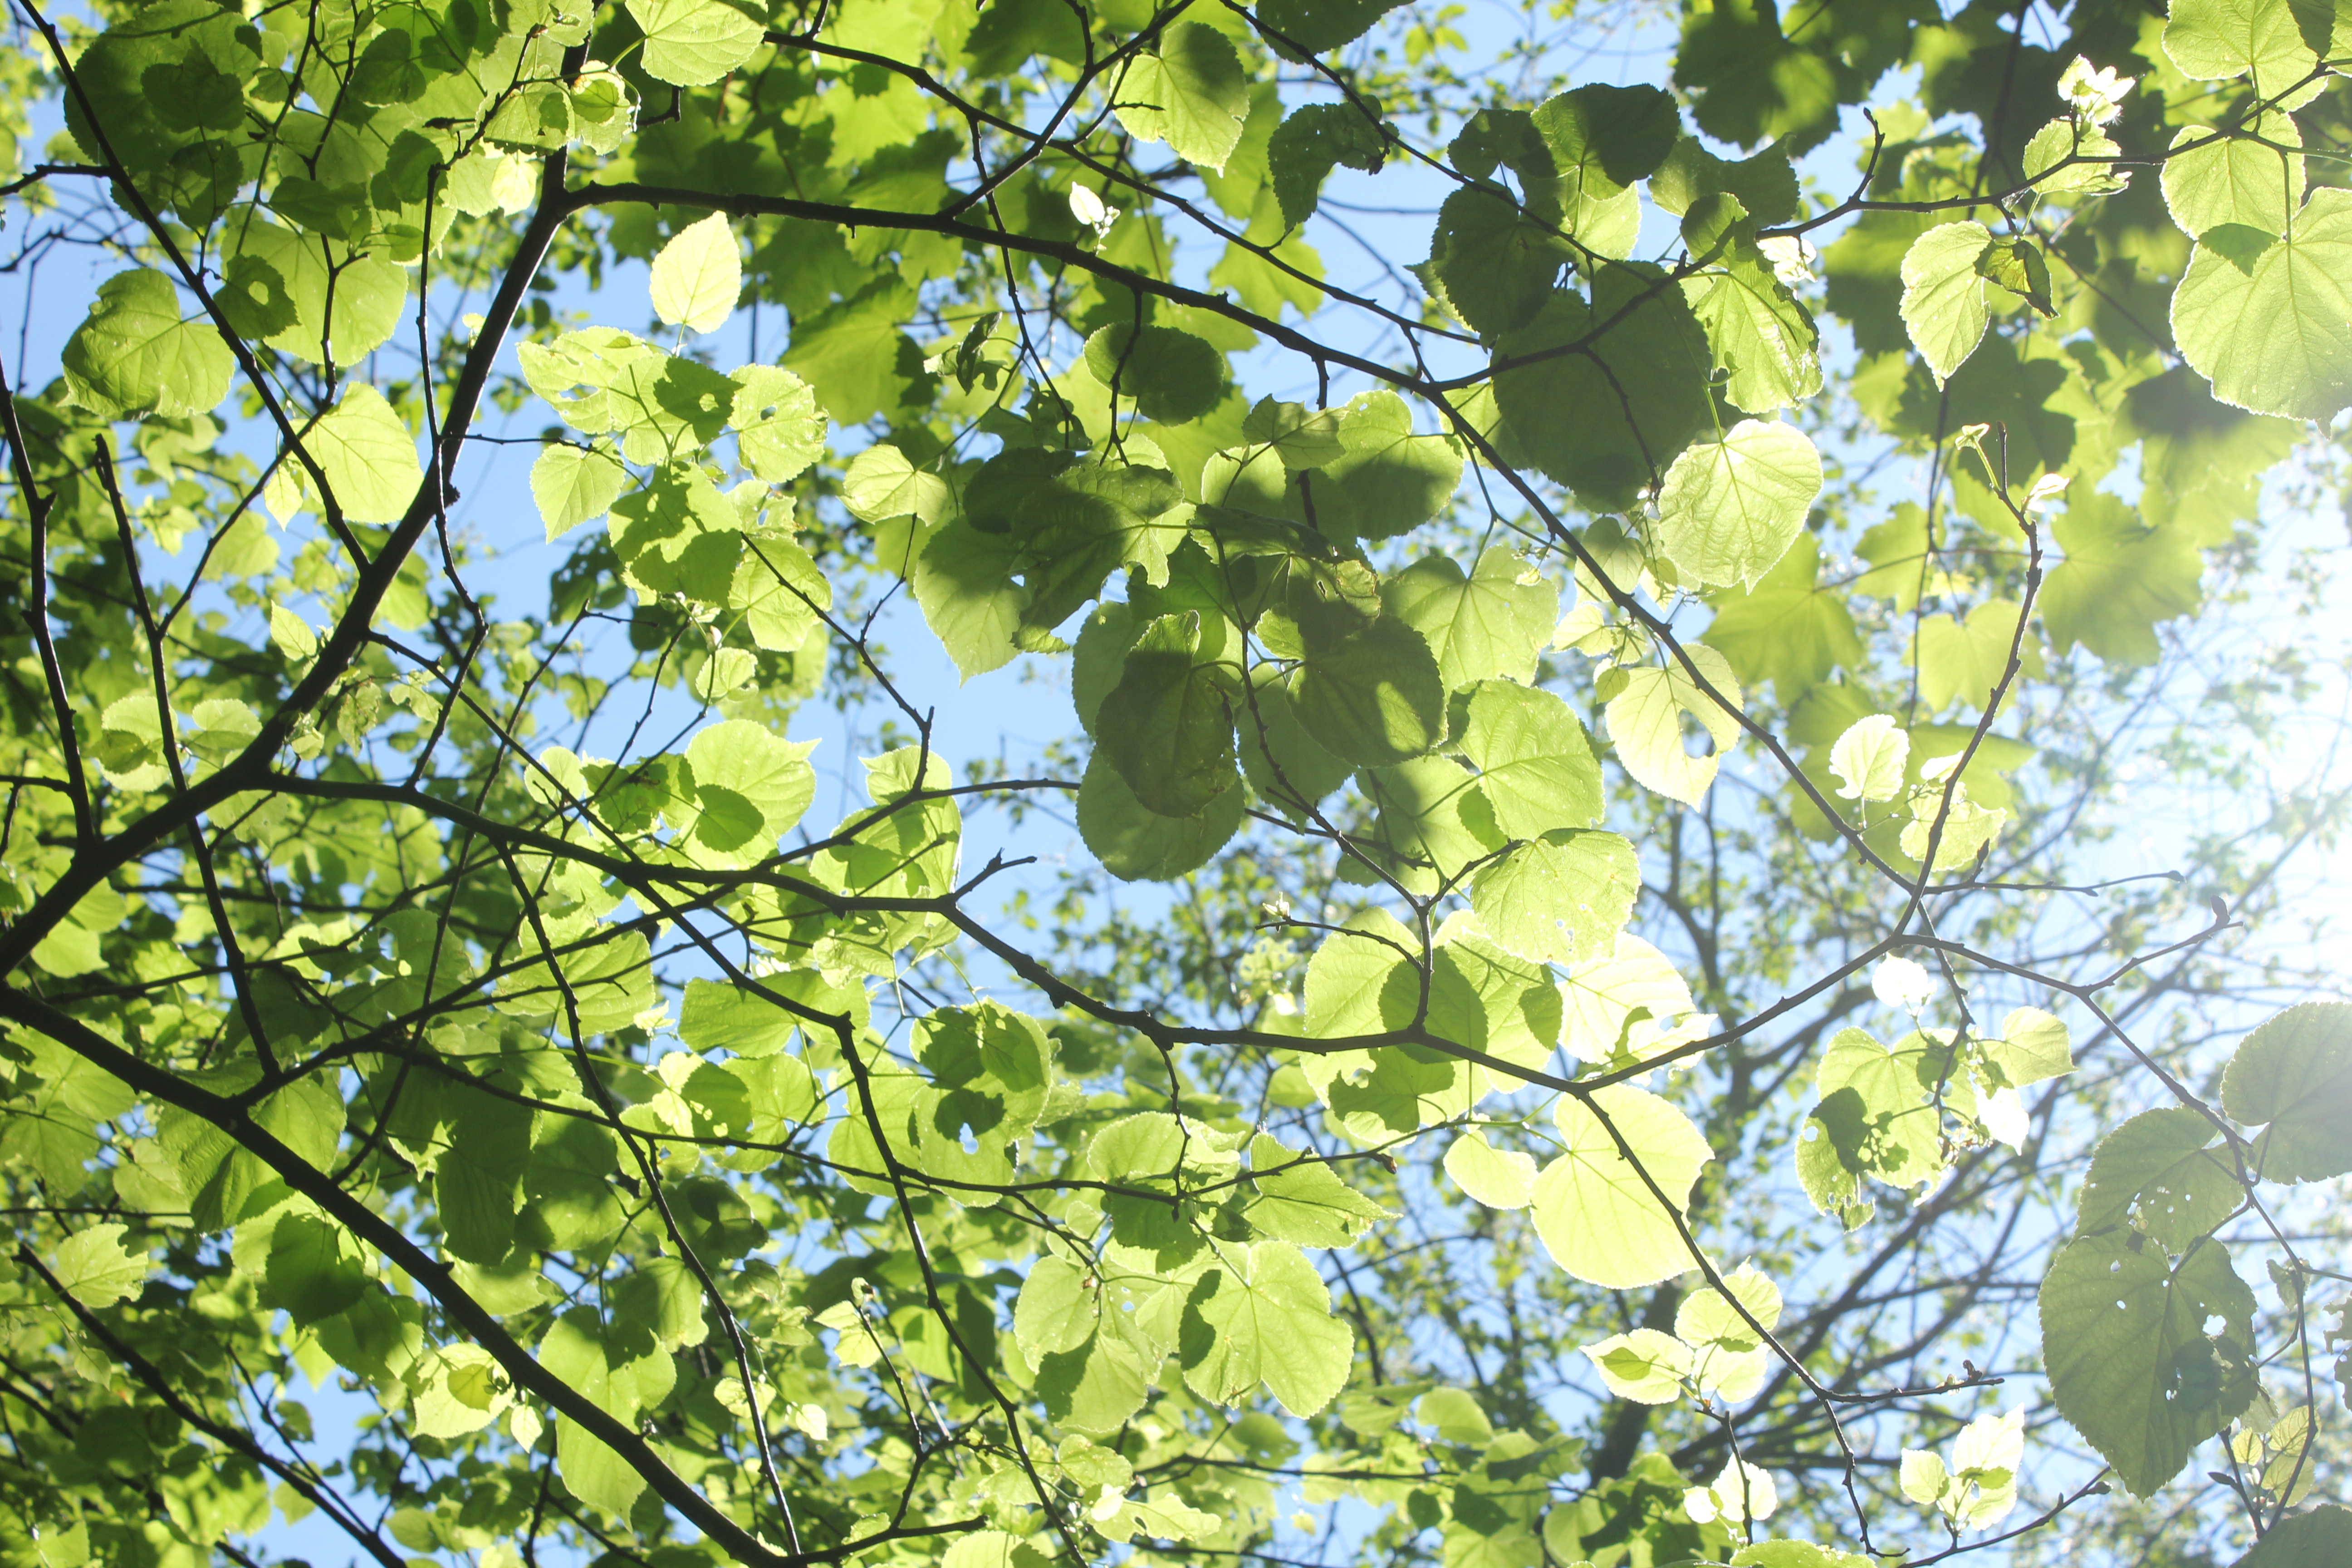 Sun shining through a canopy of green leaves against a backdrop of blue sky.